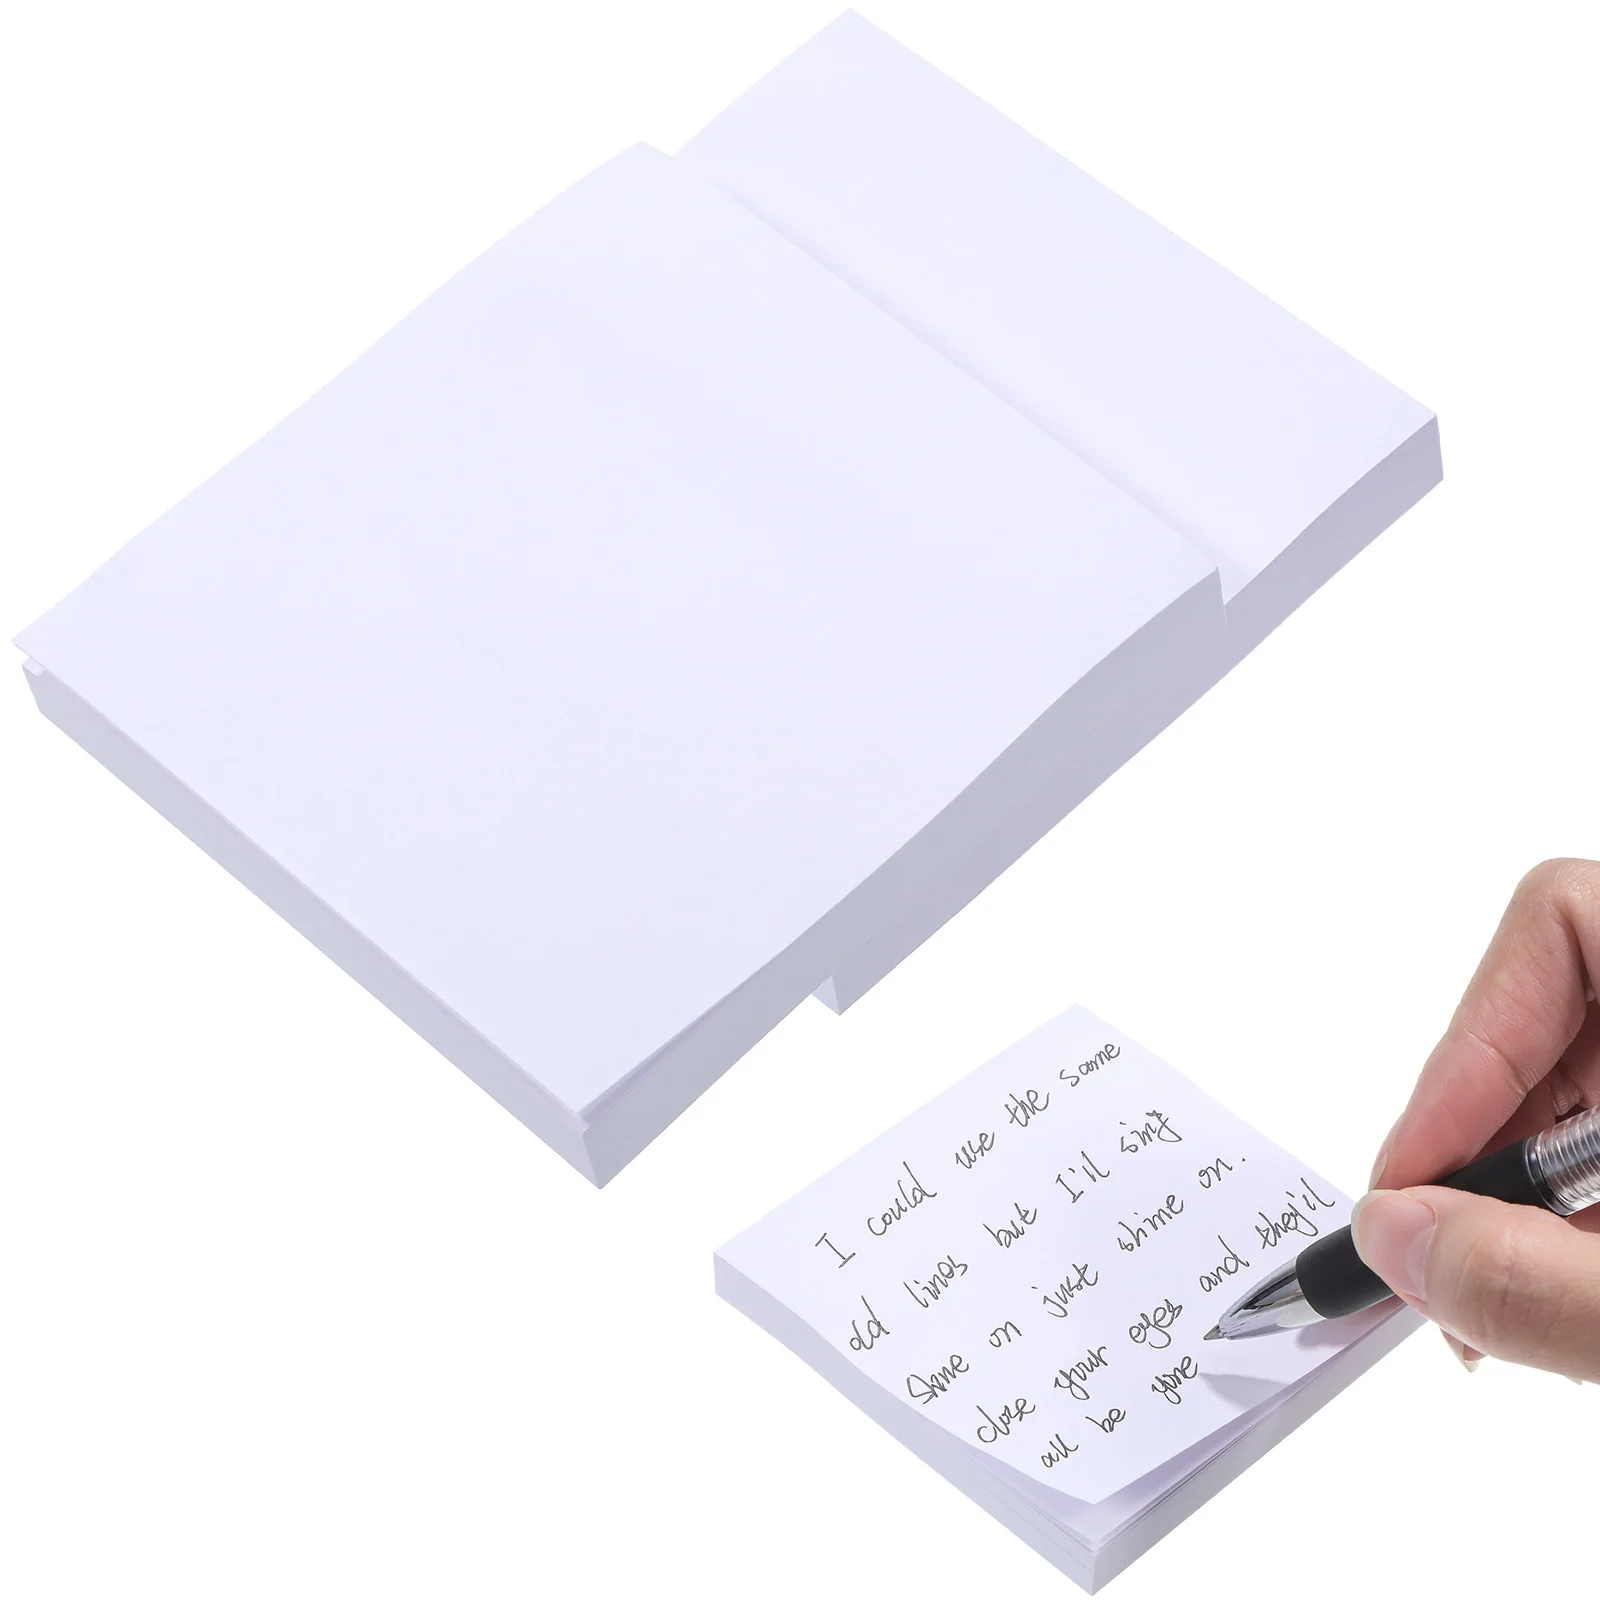 

3 Pcs Student Stationery Notepad Paper Small Memo Pads Sticky Notes Message Recording Portable Square Office